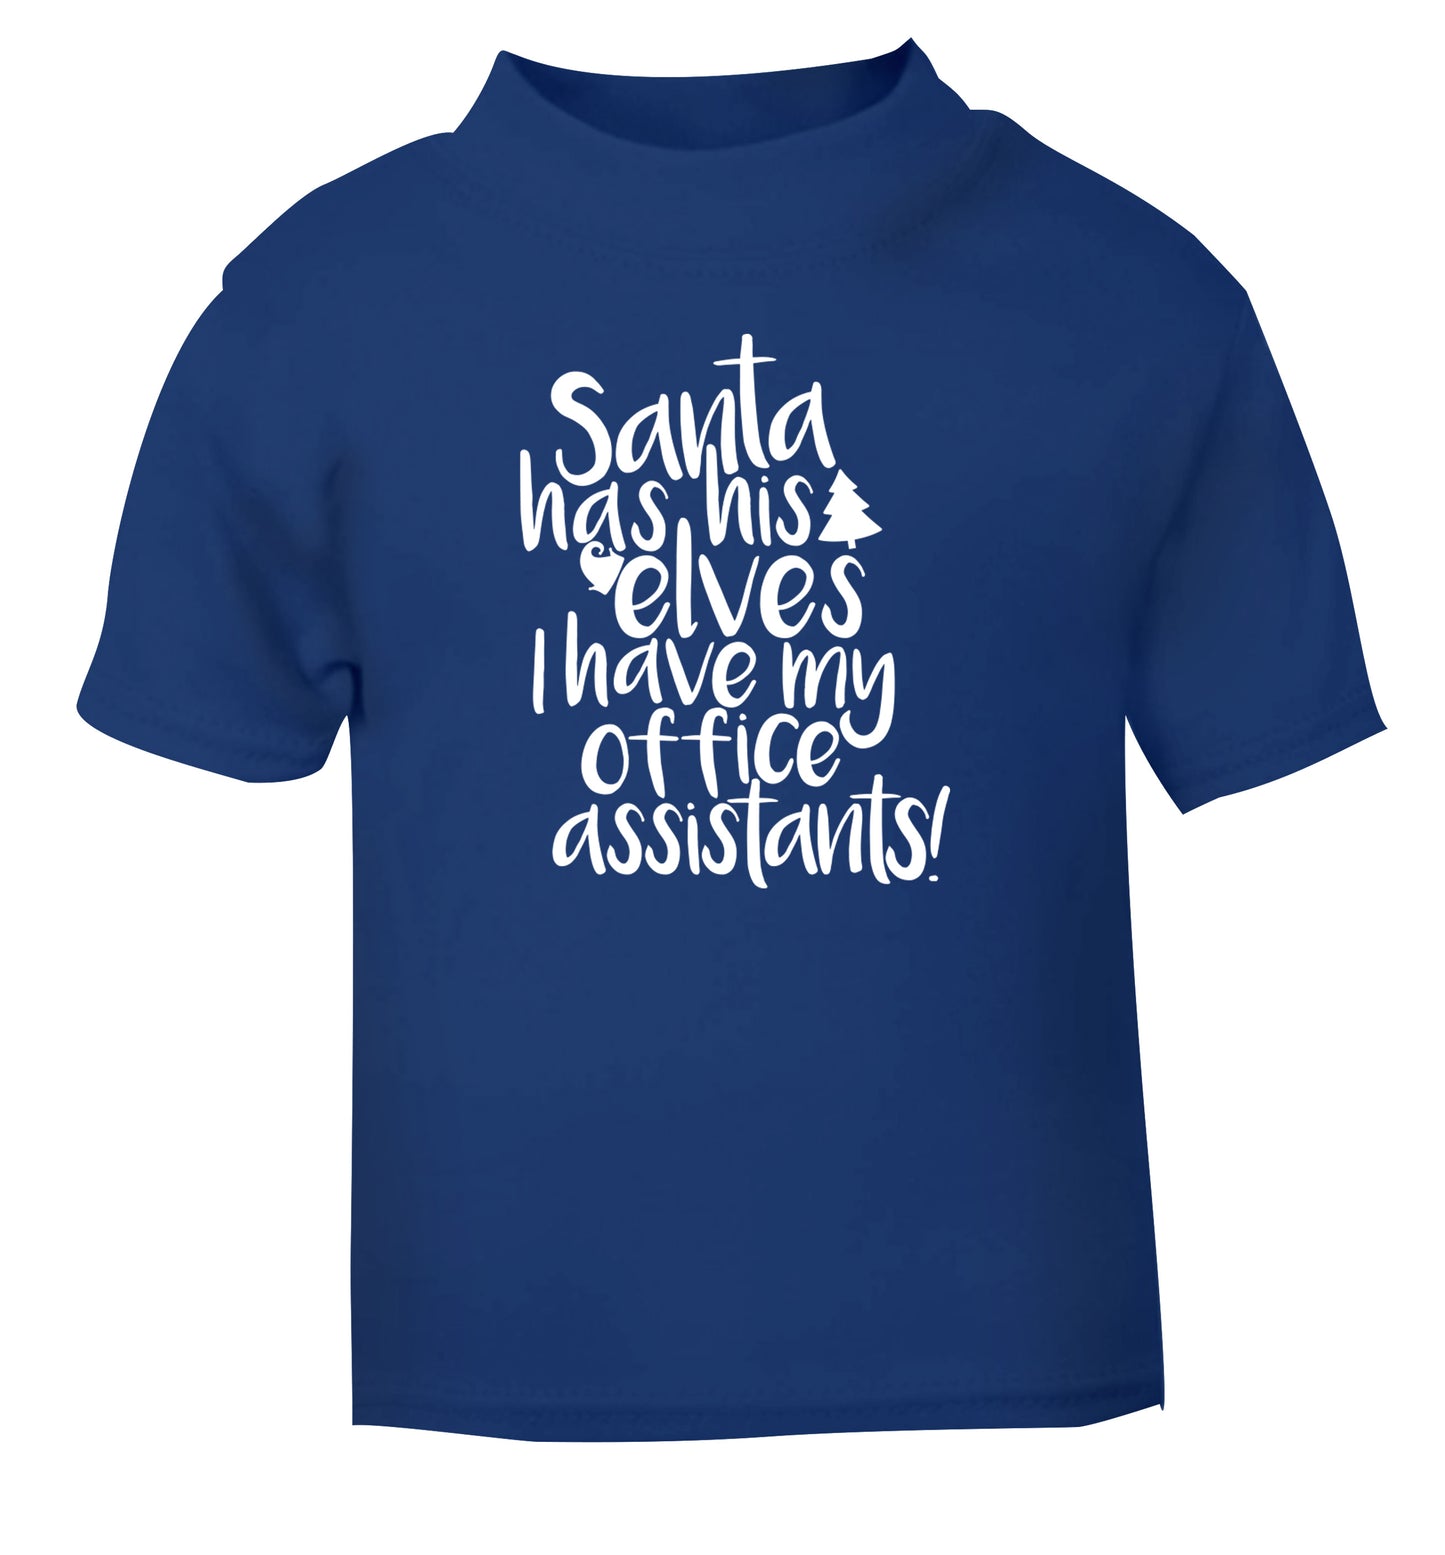 Santa has elves I have office assistants blue Baby Toddler Tshirt 2 Years